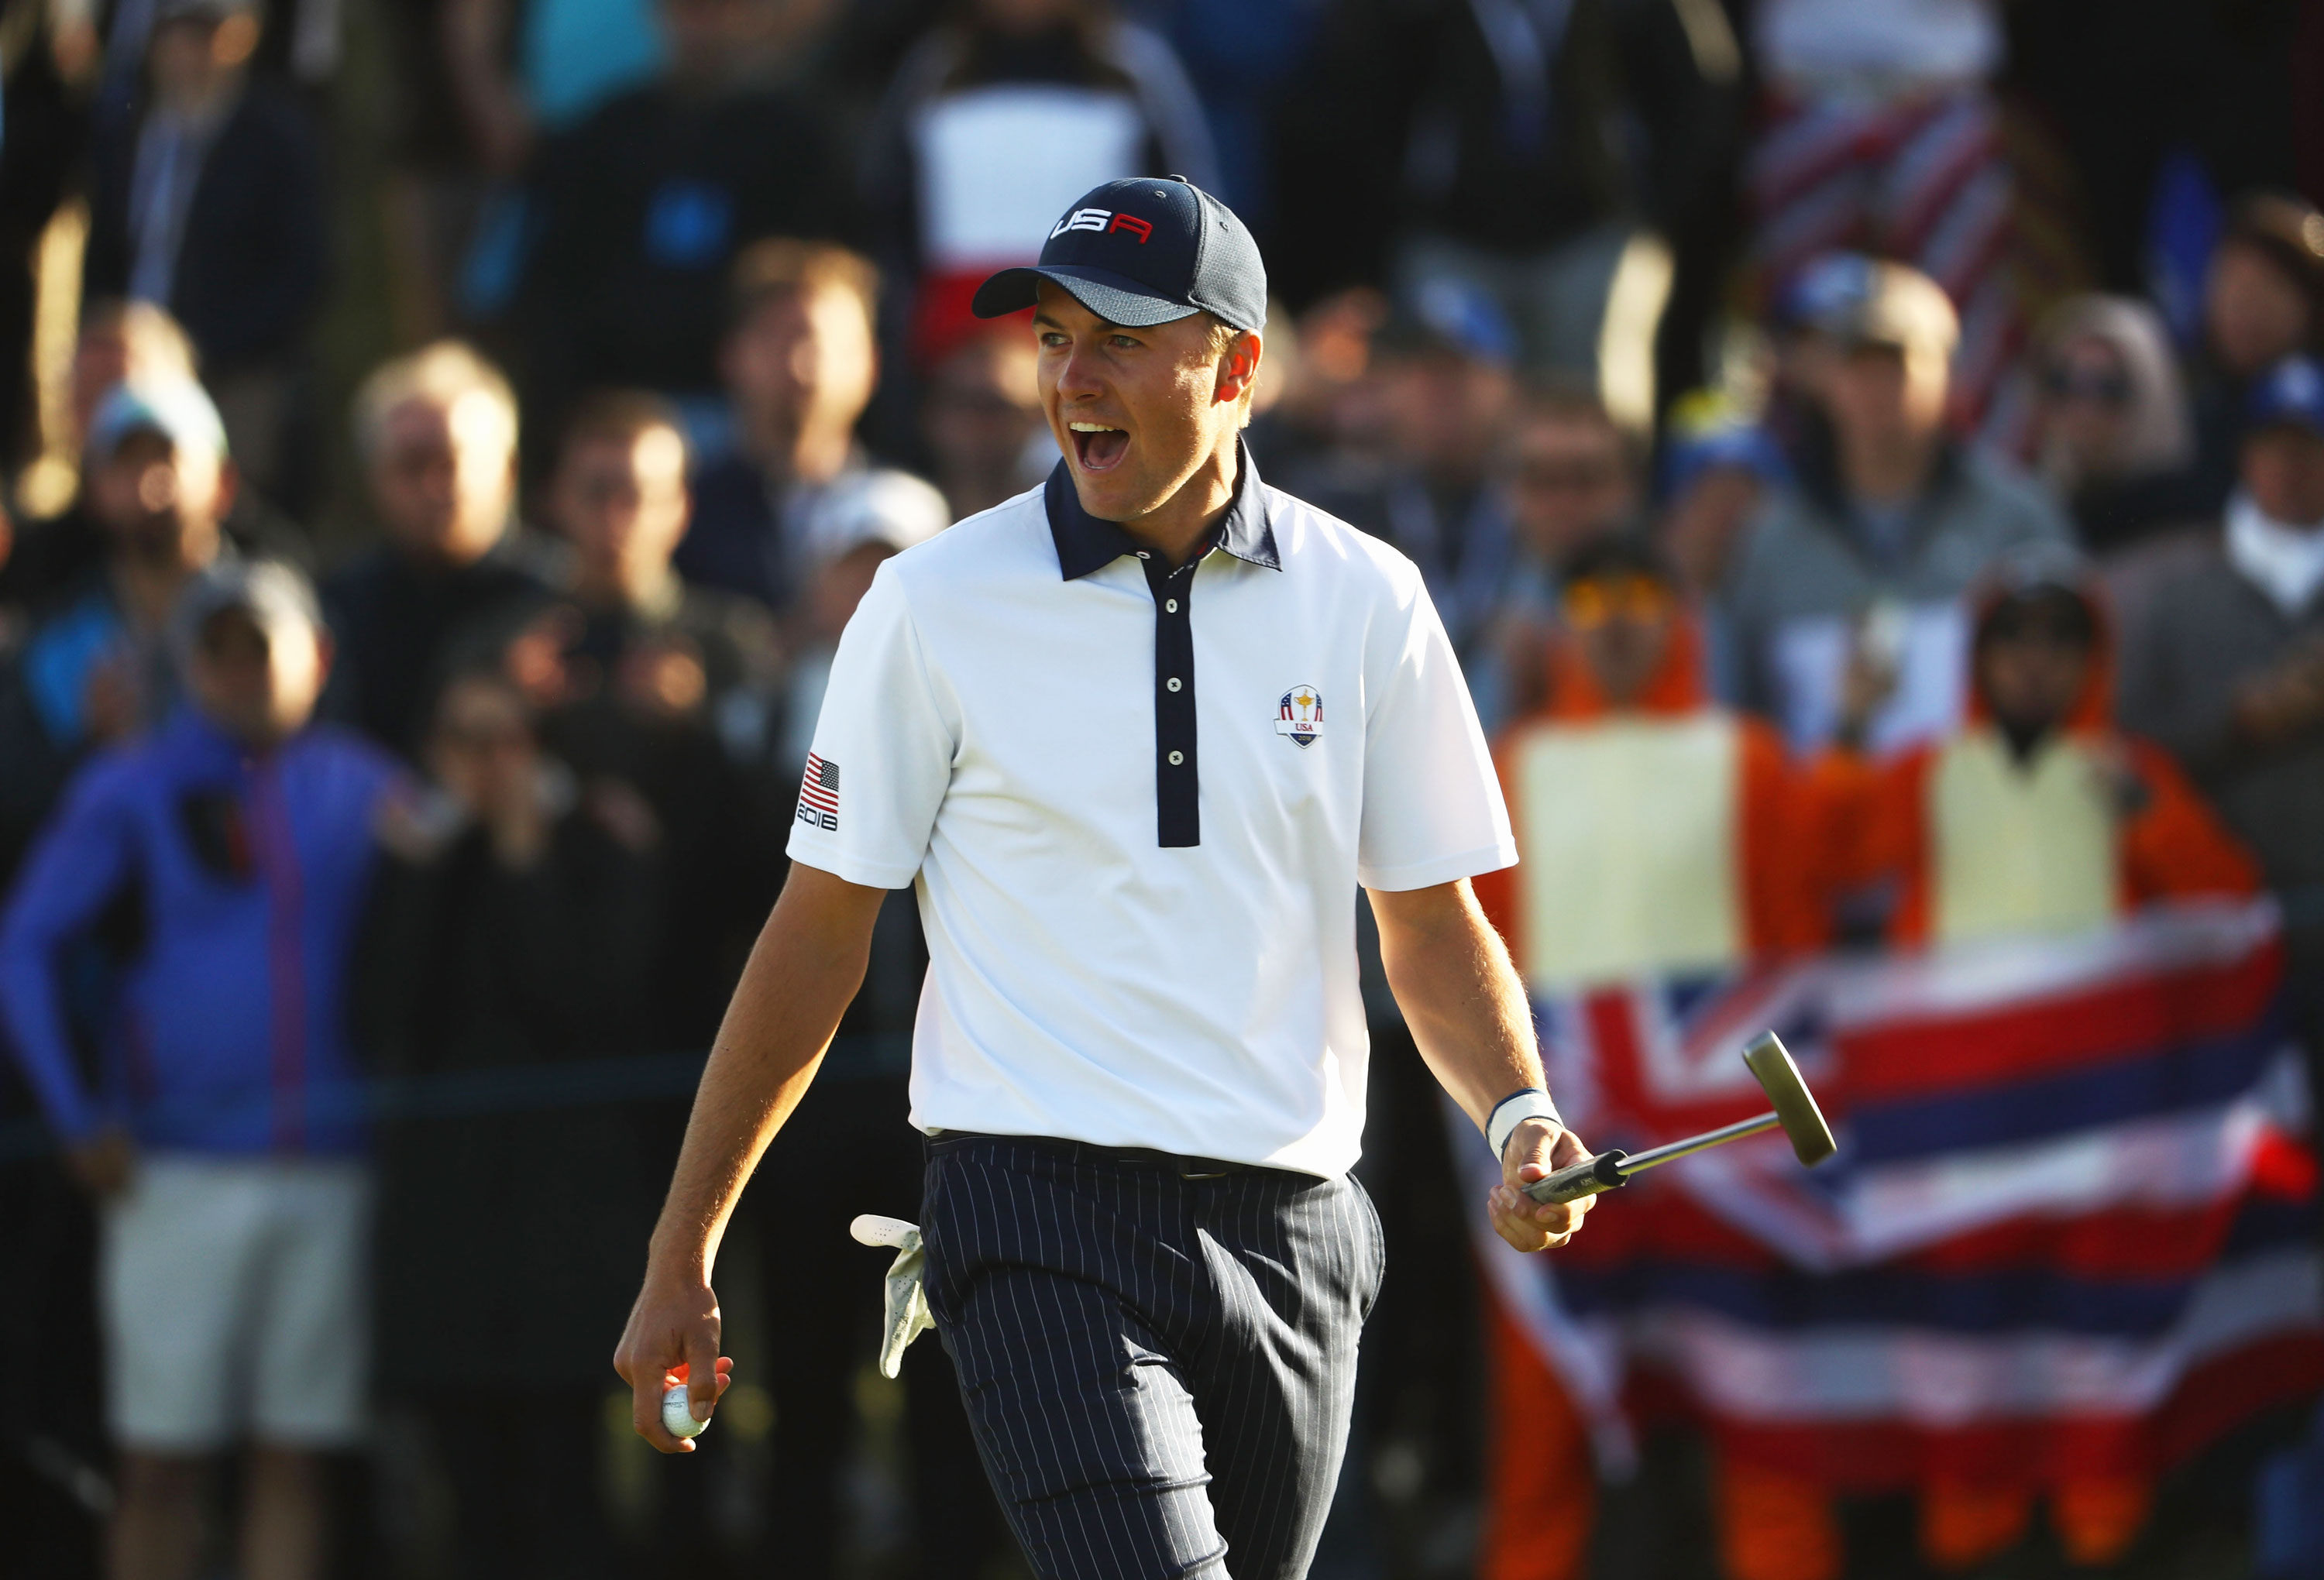 Ryder Cup 2021 Spieth, Schauffele lead American captains picks; Reed left off Golf News and Tour Information Golf DIgest